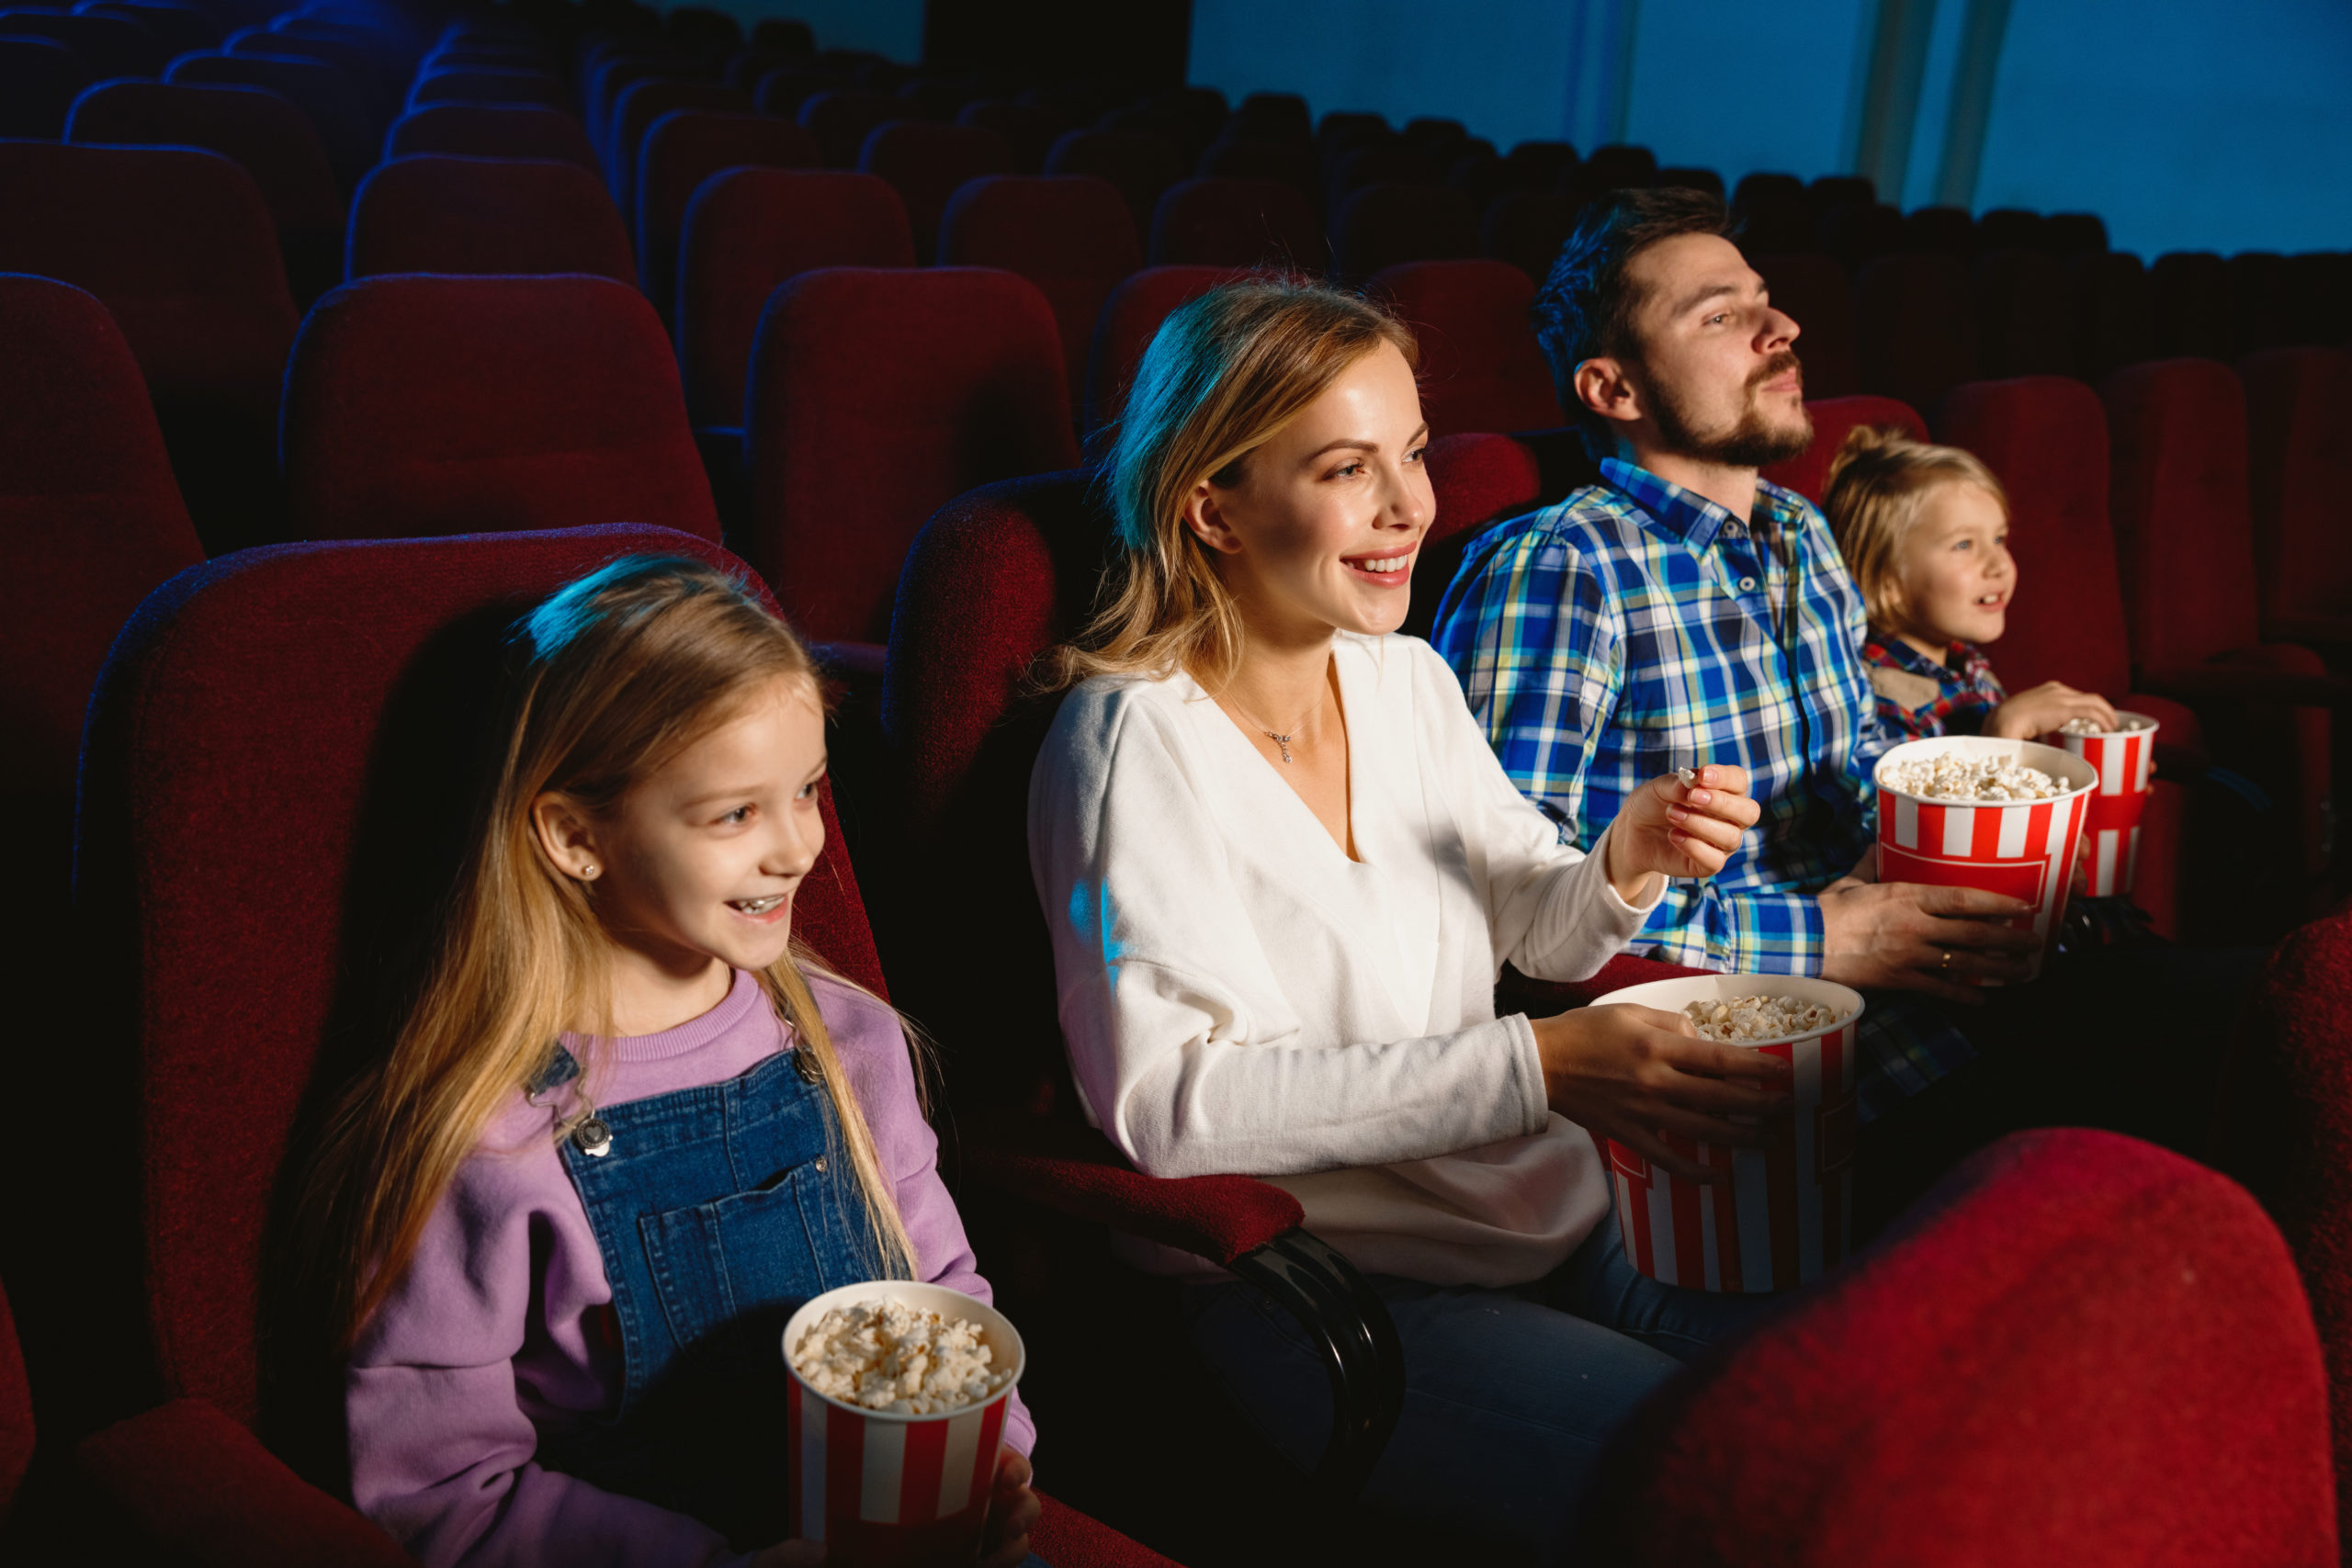 What are the advantages of cinema?